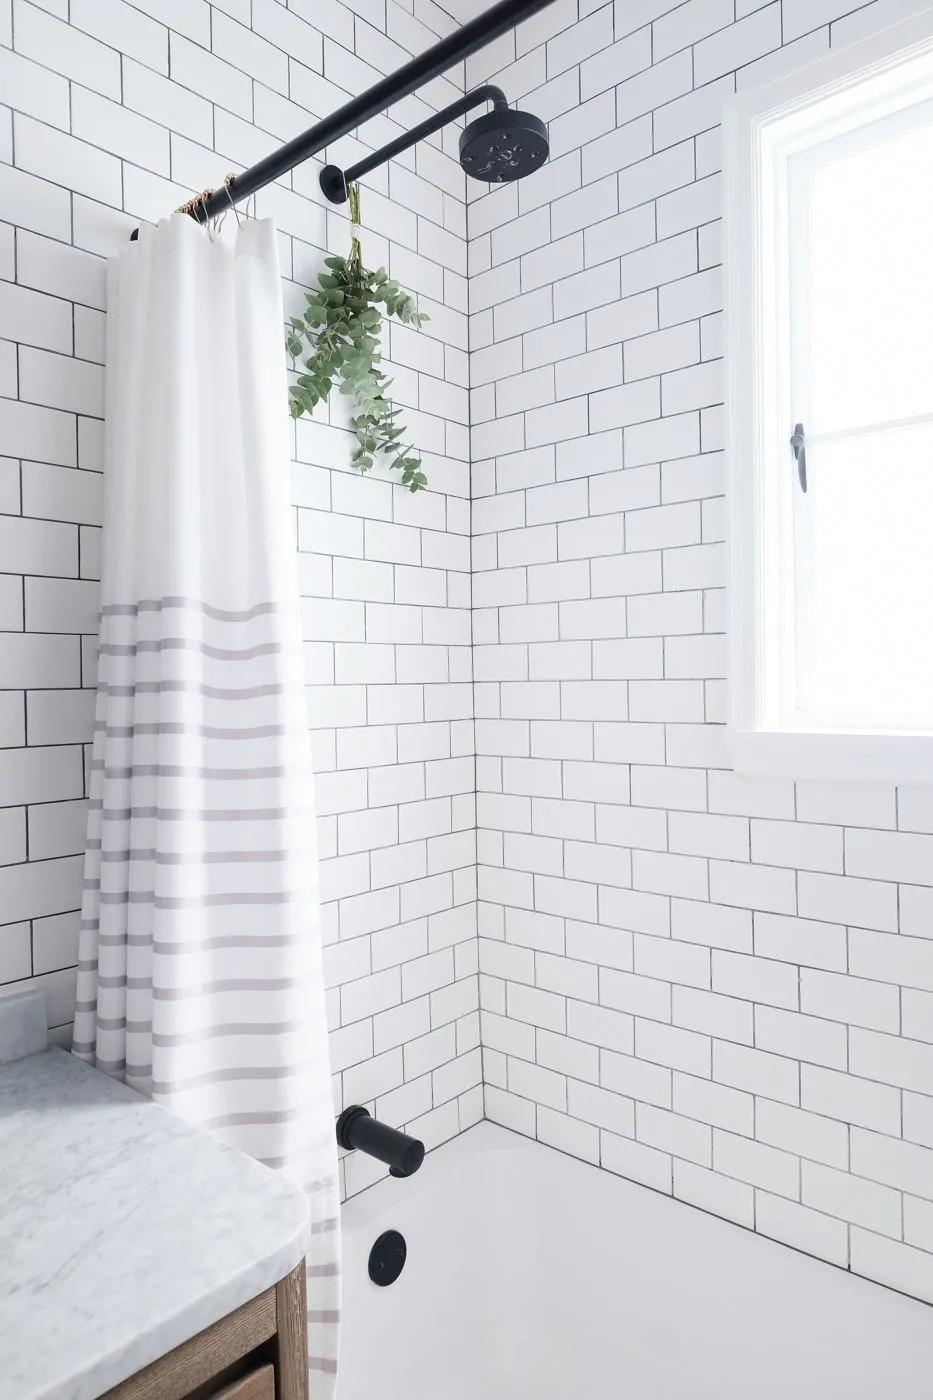 Beautiful all white designer bathroom flooring tiles & tiling design with a window and a small plant